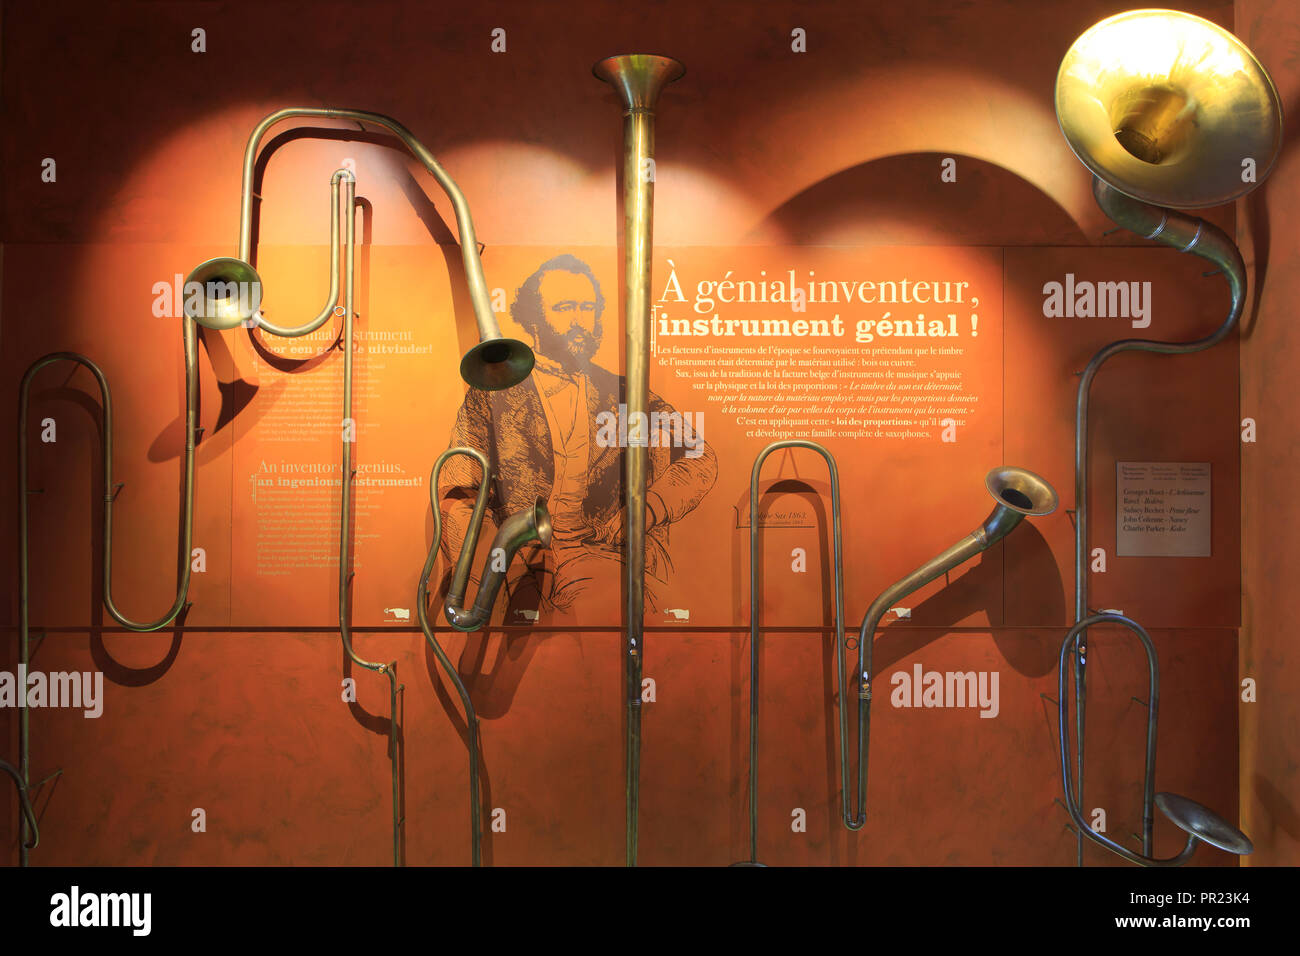 Display of musical instruments invented by Adolphe Sax (1814-1894) including the saxophone at the museum dedicated to him in Dinant, Belgium Stock Photo